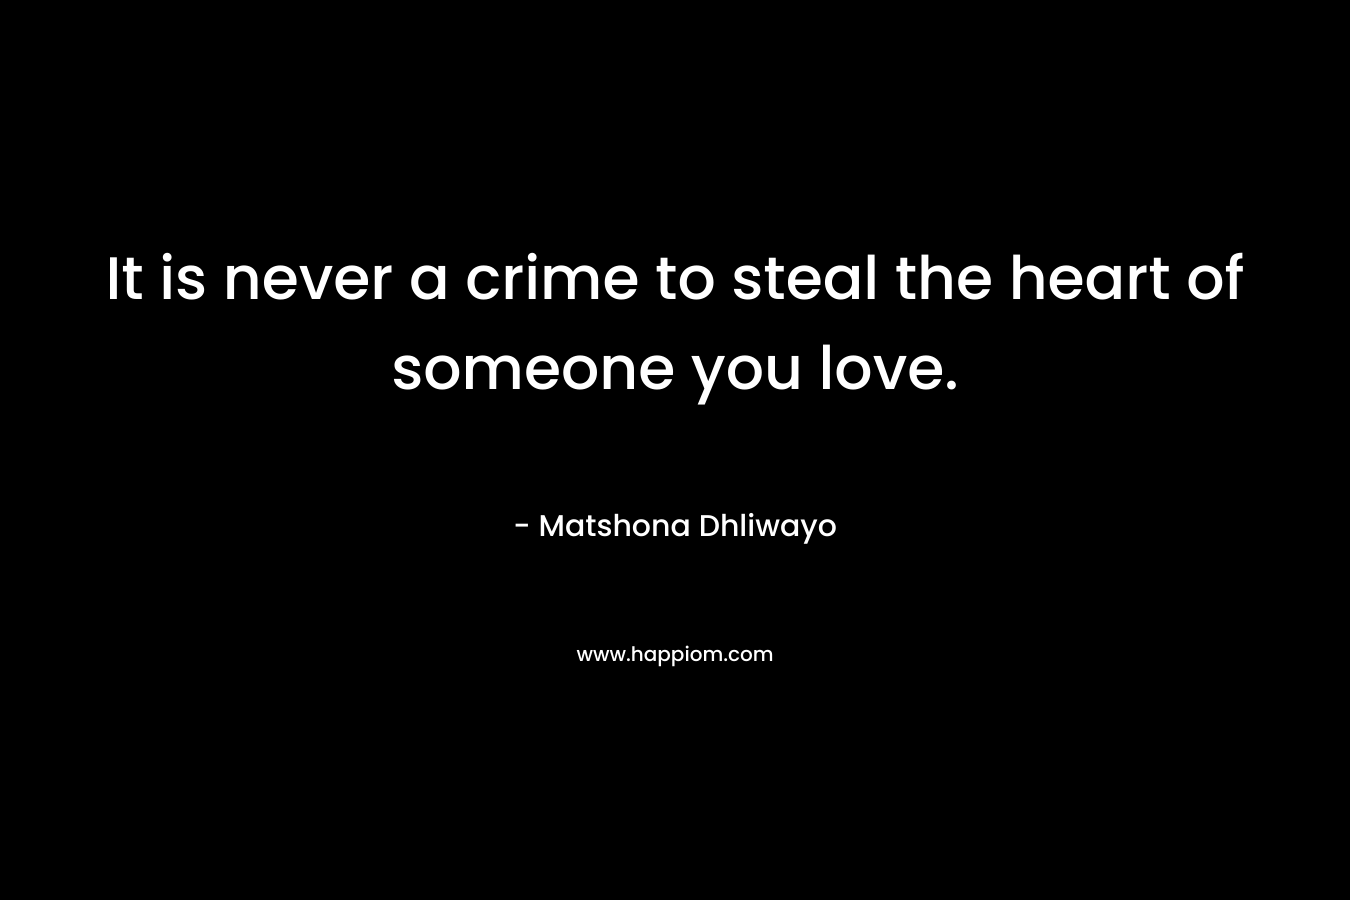 It is never a crime to steal the heart of someone you love. – Matshona Dhliwayo